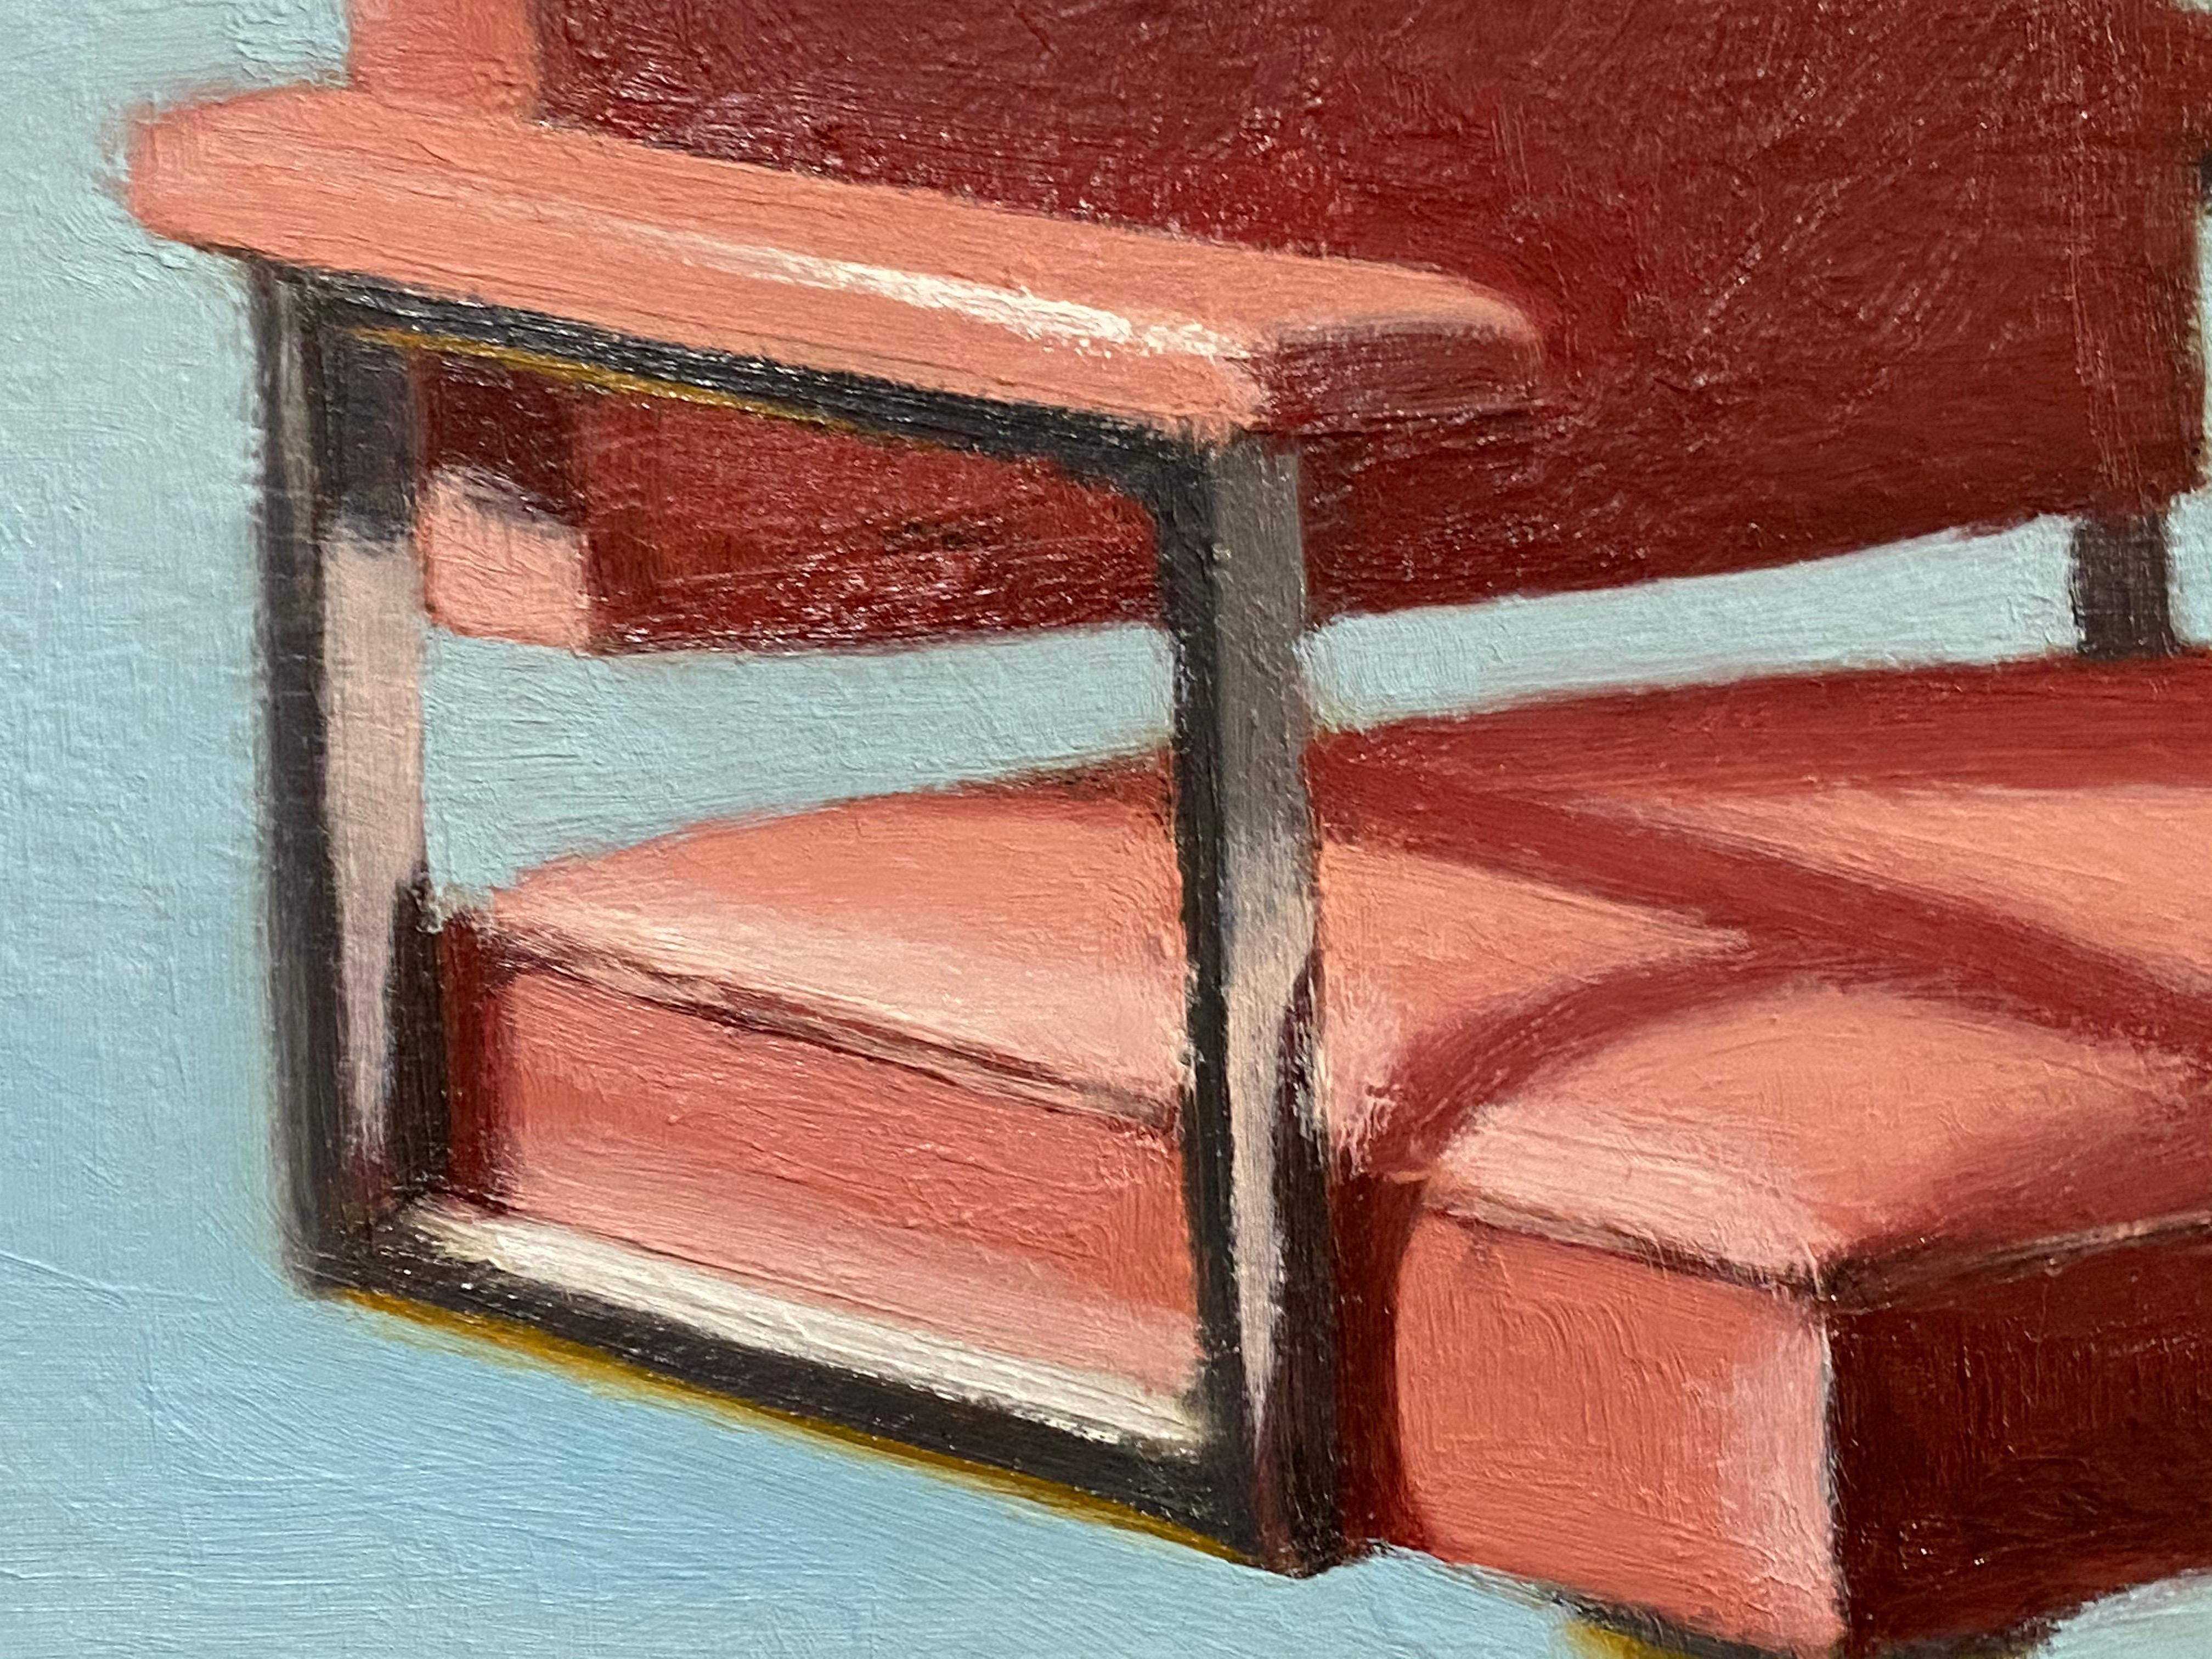 Alex is a master of the use and play of light and shadow.
Brilliantly executed and simple statement of a mid-century office chair
Comes Unframed

Distant Memories
24 x 24 x .5 
Oil On Wood Panel


Alex Selkowitz is a contemporary painter. . He is